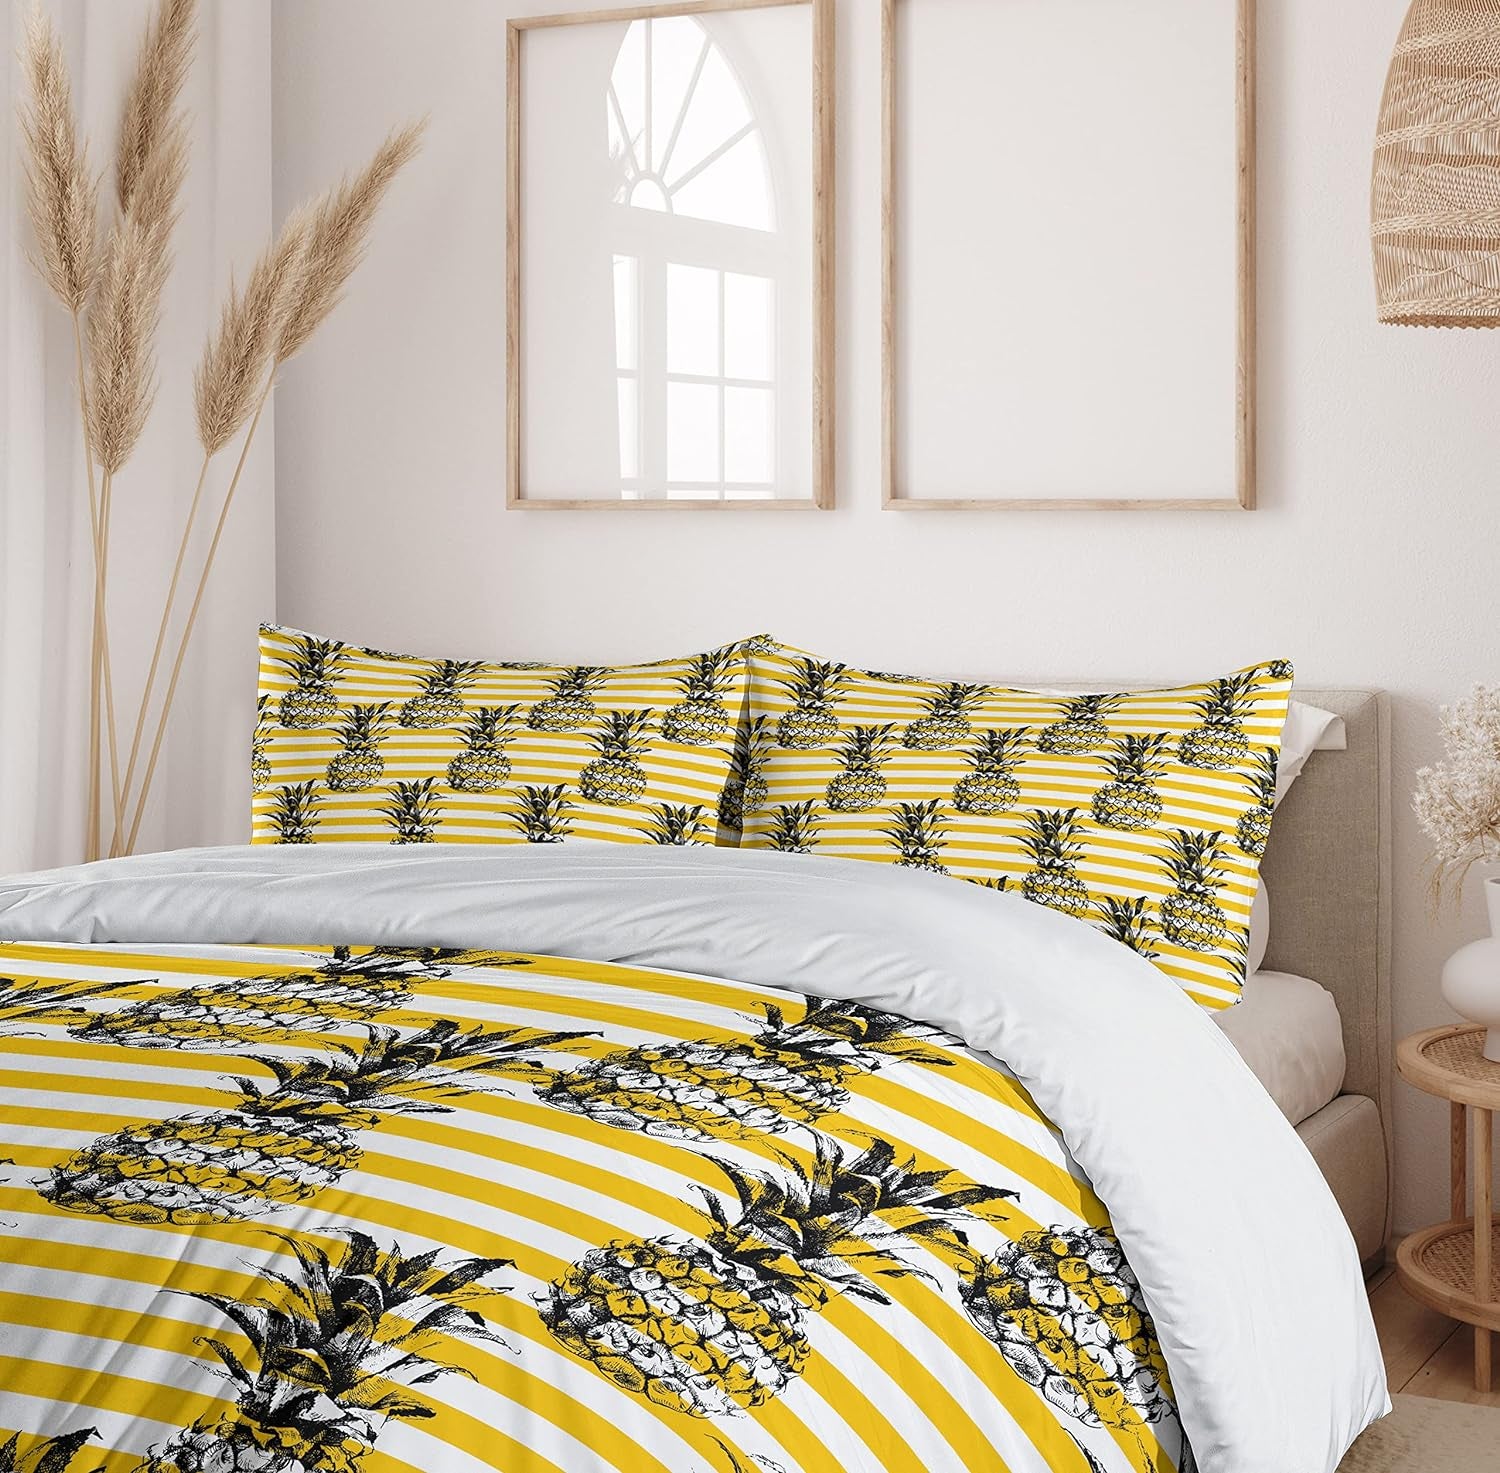 Decorative Retro Striped Background with Pineapple Vintage Hippie Graphic 3 Piece Bedding Set with 2 Pillow Shams, Duvet Cover Set Queen Size, Yellow Black